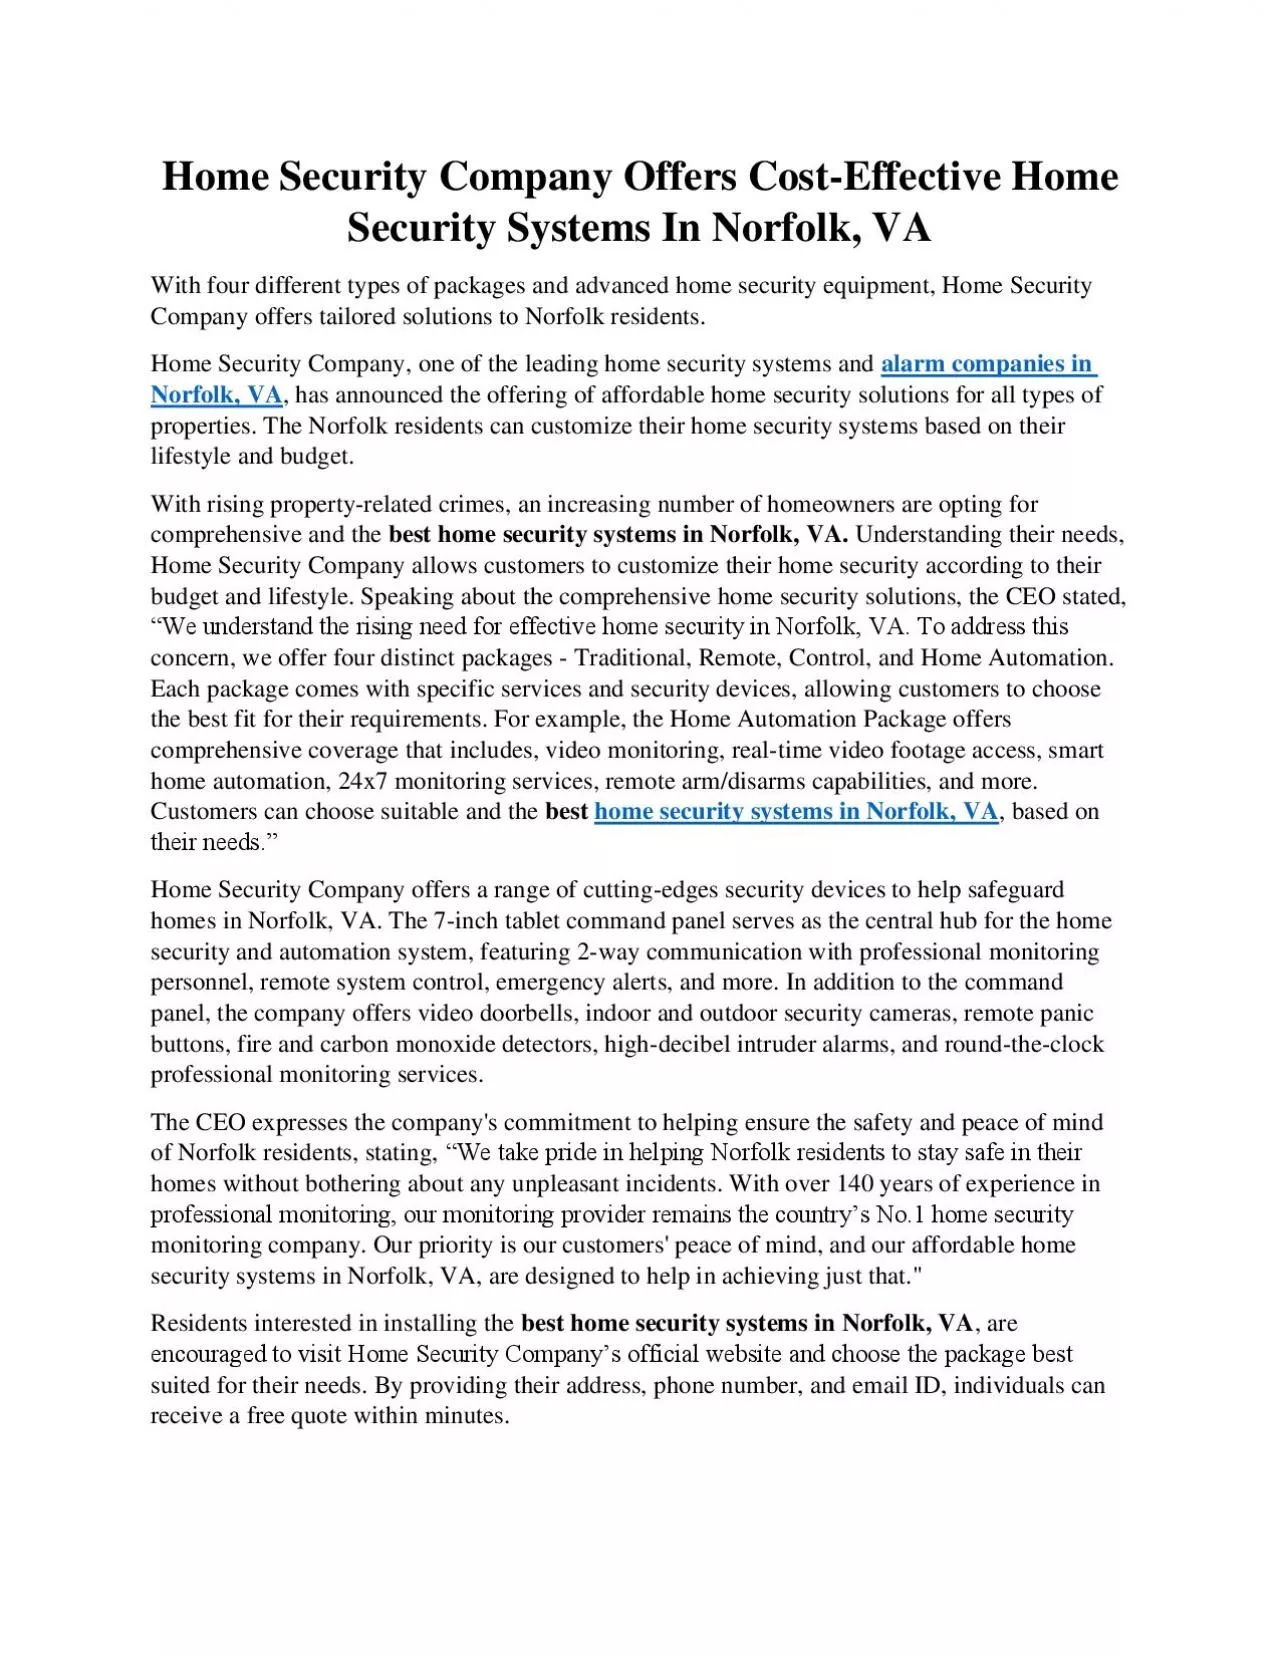 Home Security Company Offers Cost-Effective Home Security Systems In Norfolk, VA